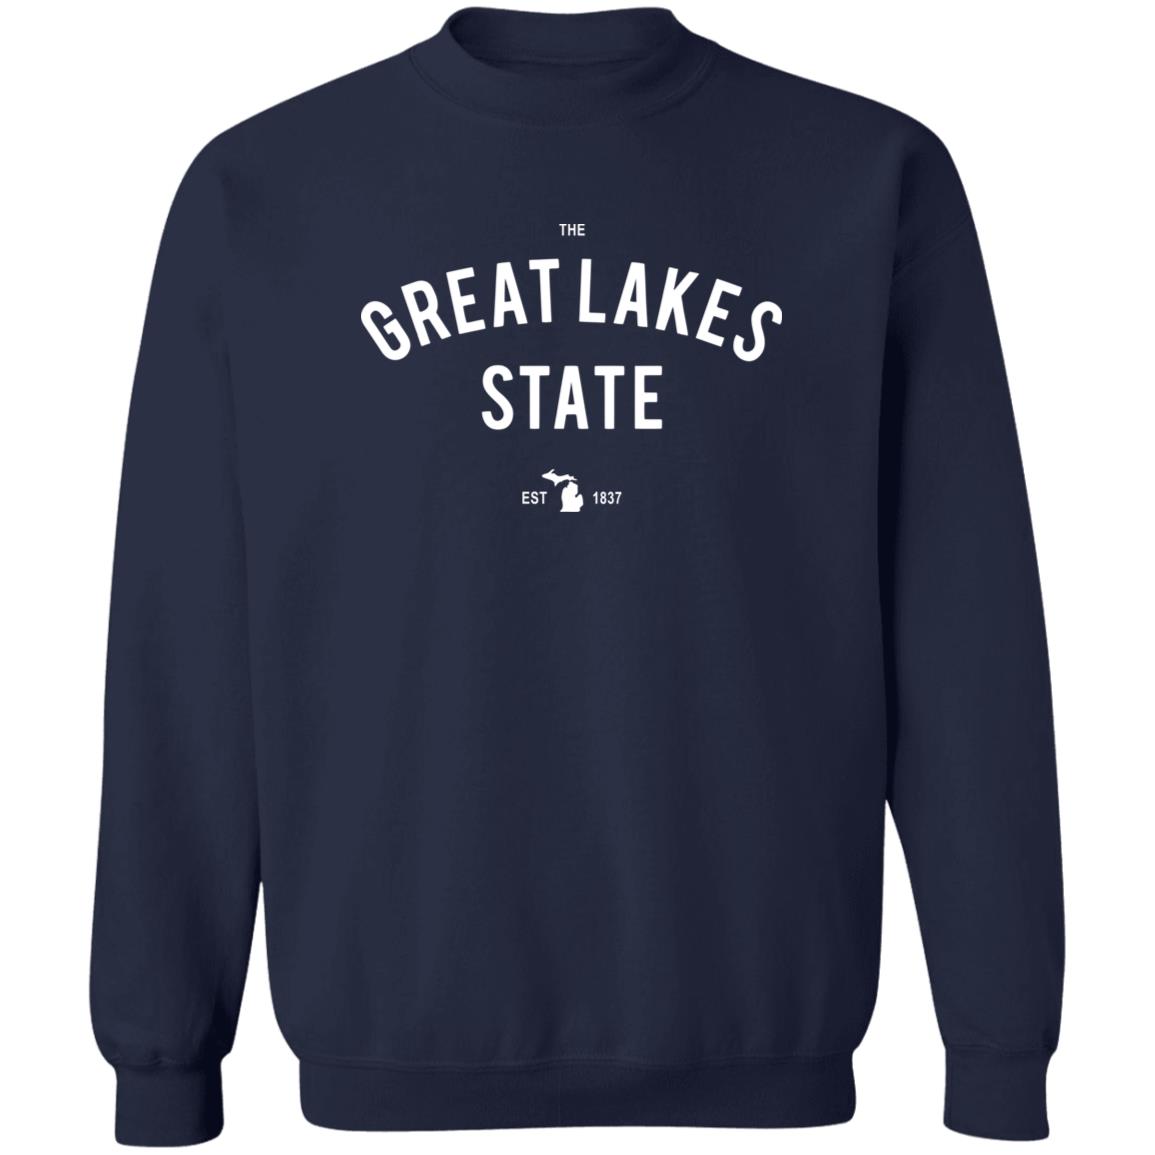 The Great Lakes State - White G180 Crewneck Pullover Sweatshirt